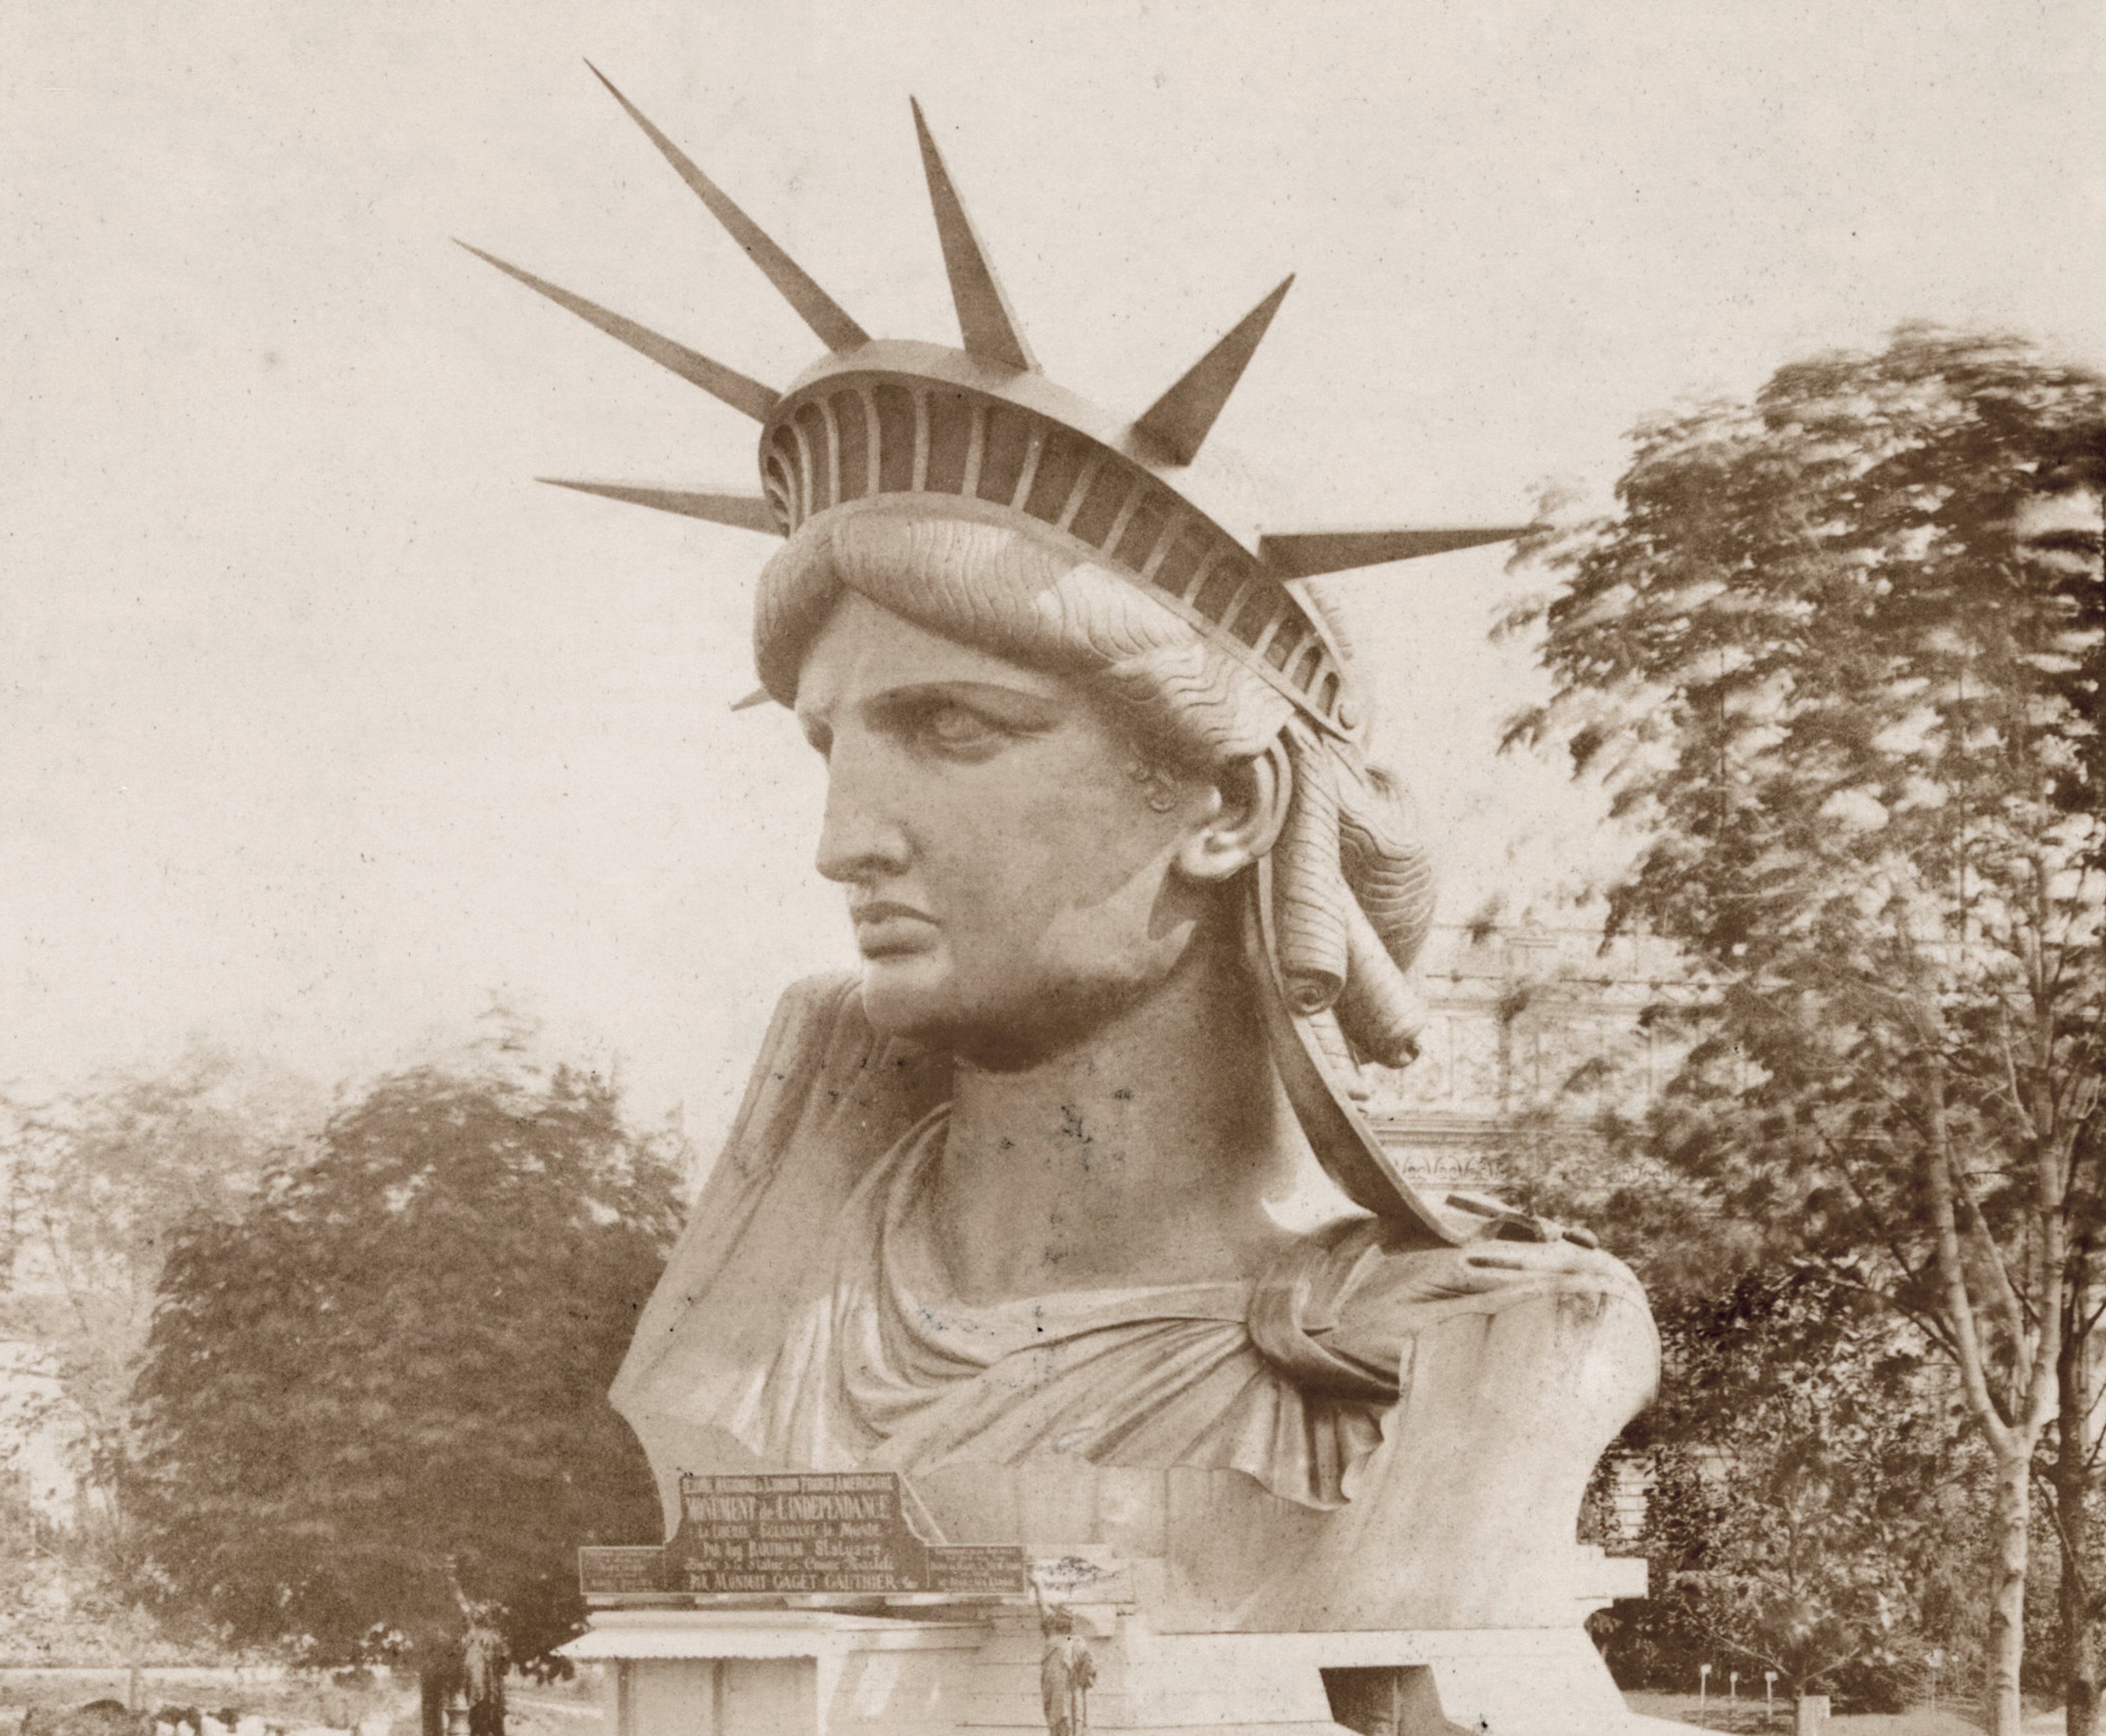 History of the Statue of Liberty (1860s-Today)